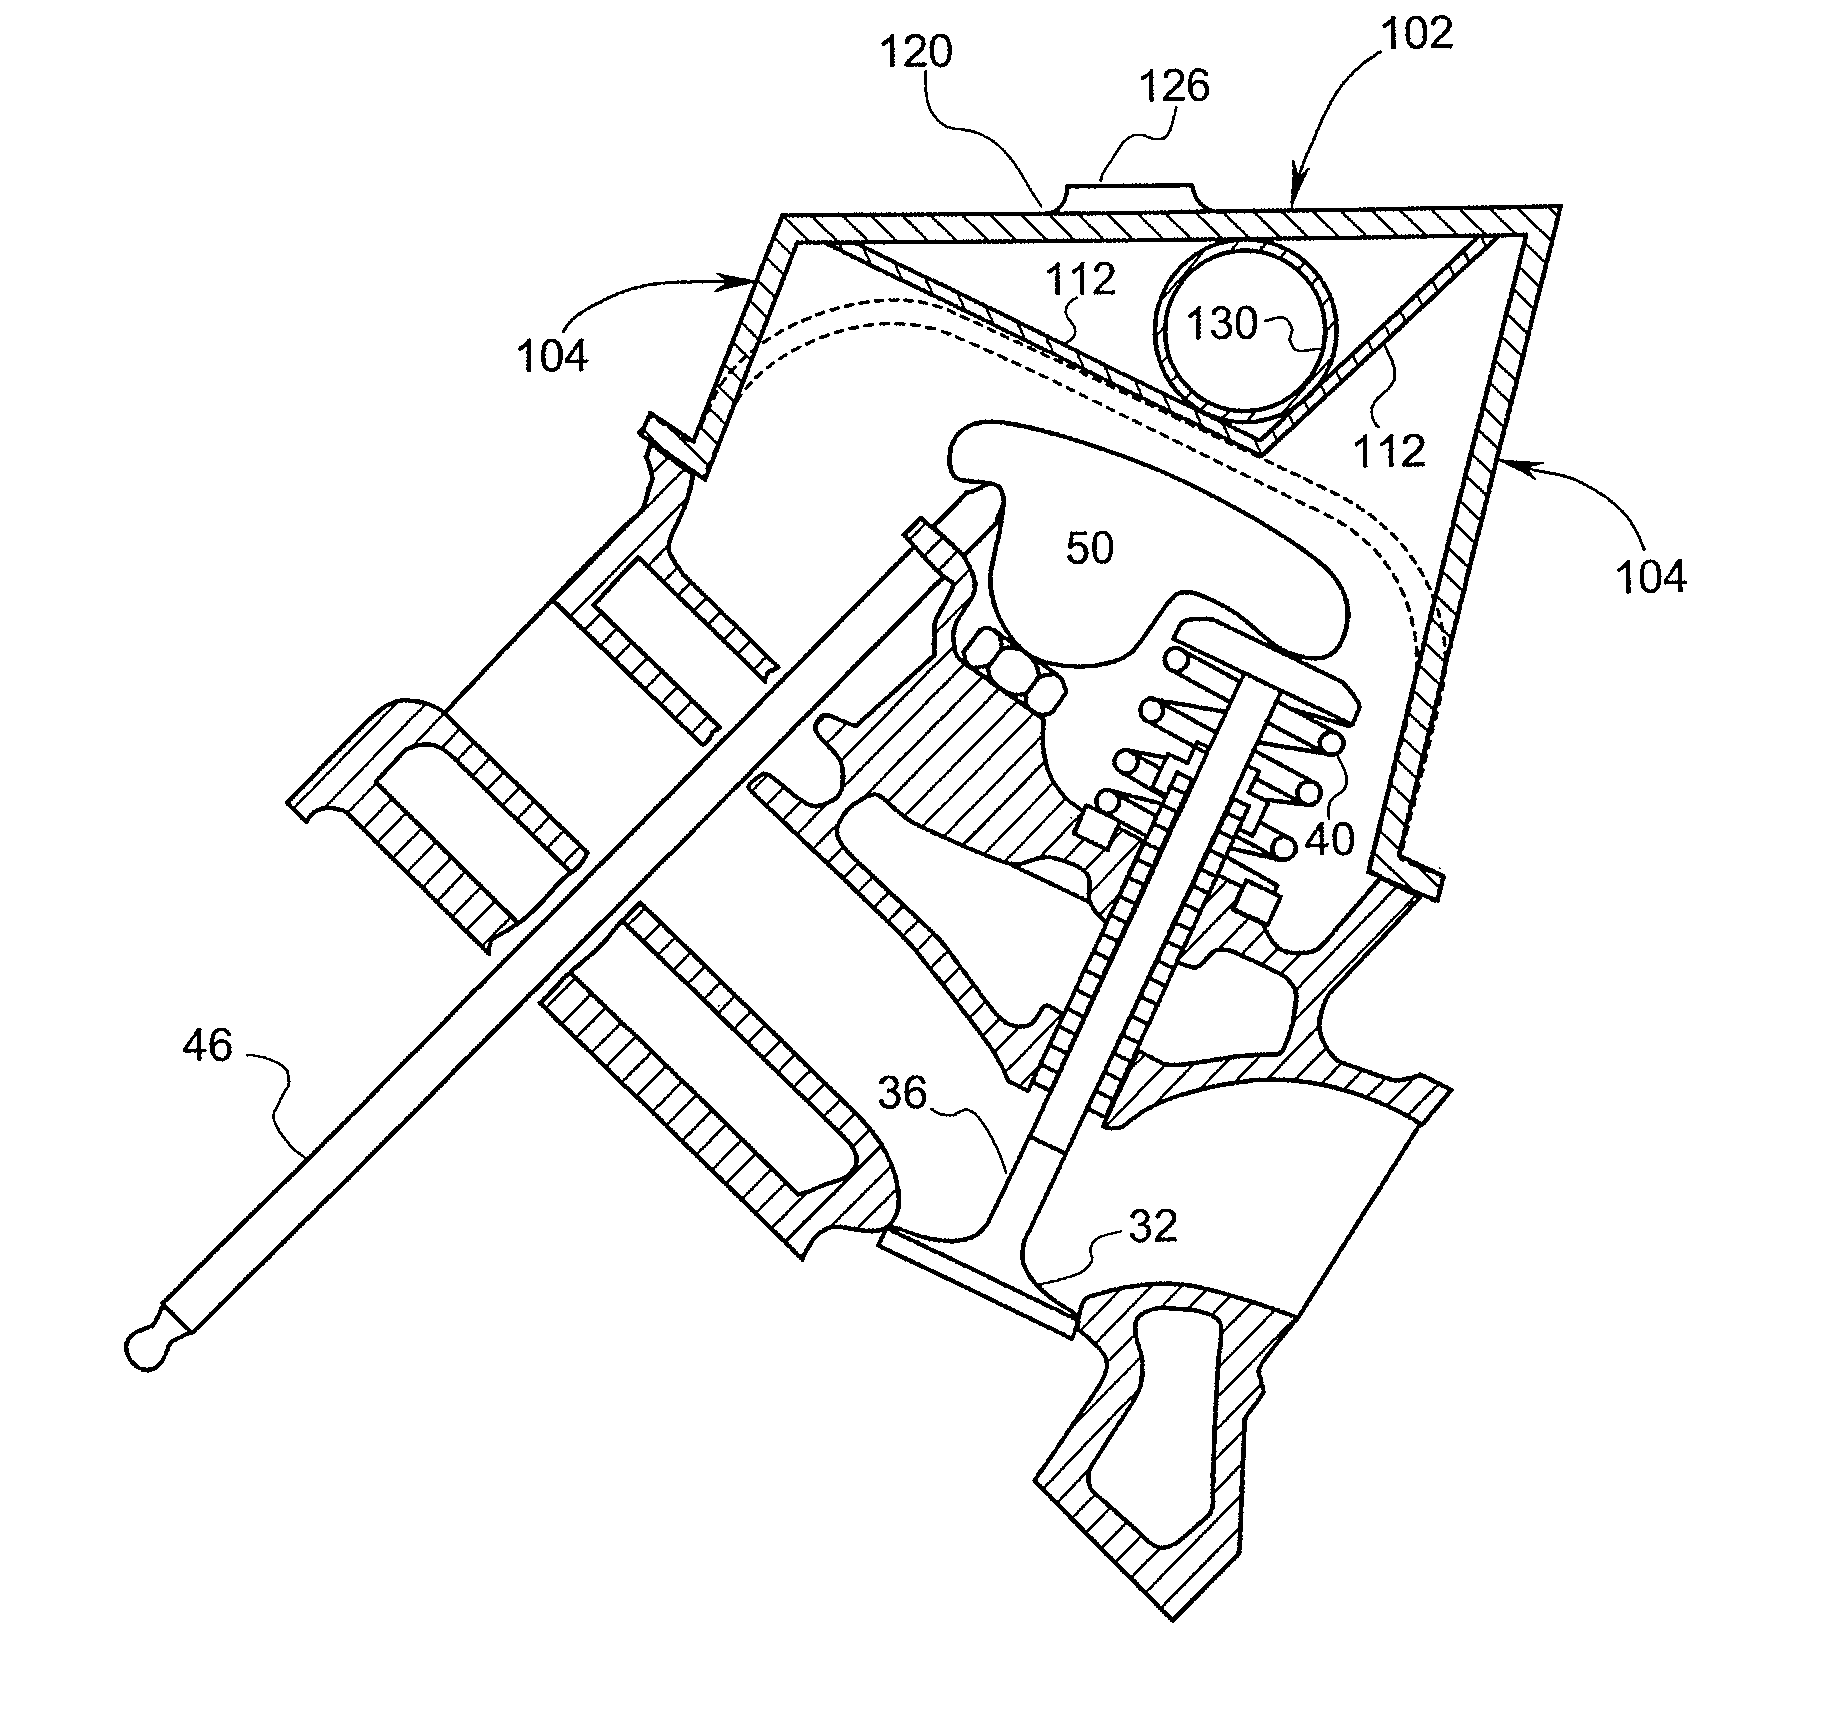 Valve cover housing for internal combustion engines